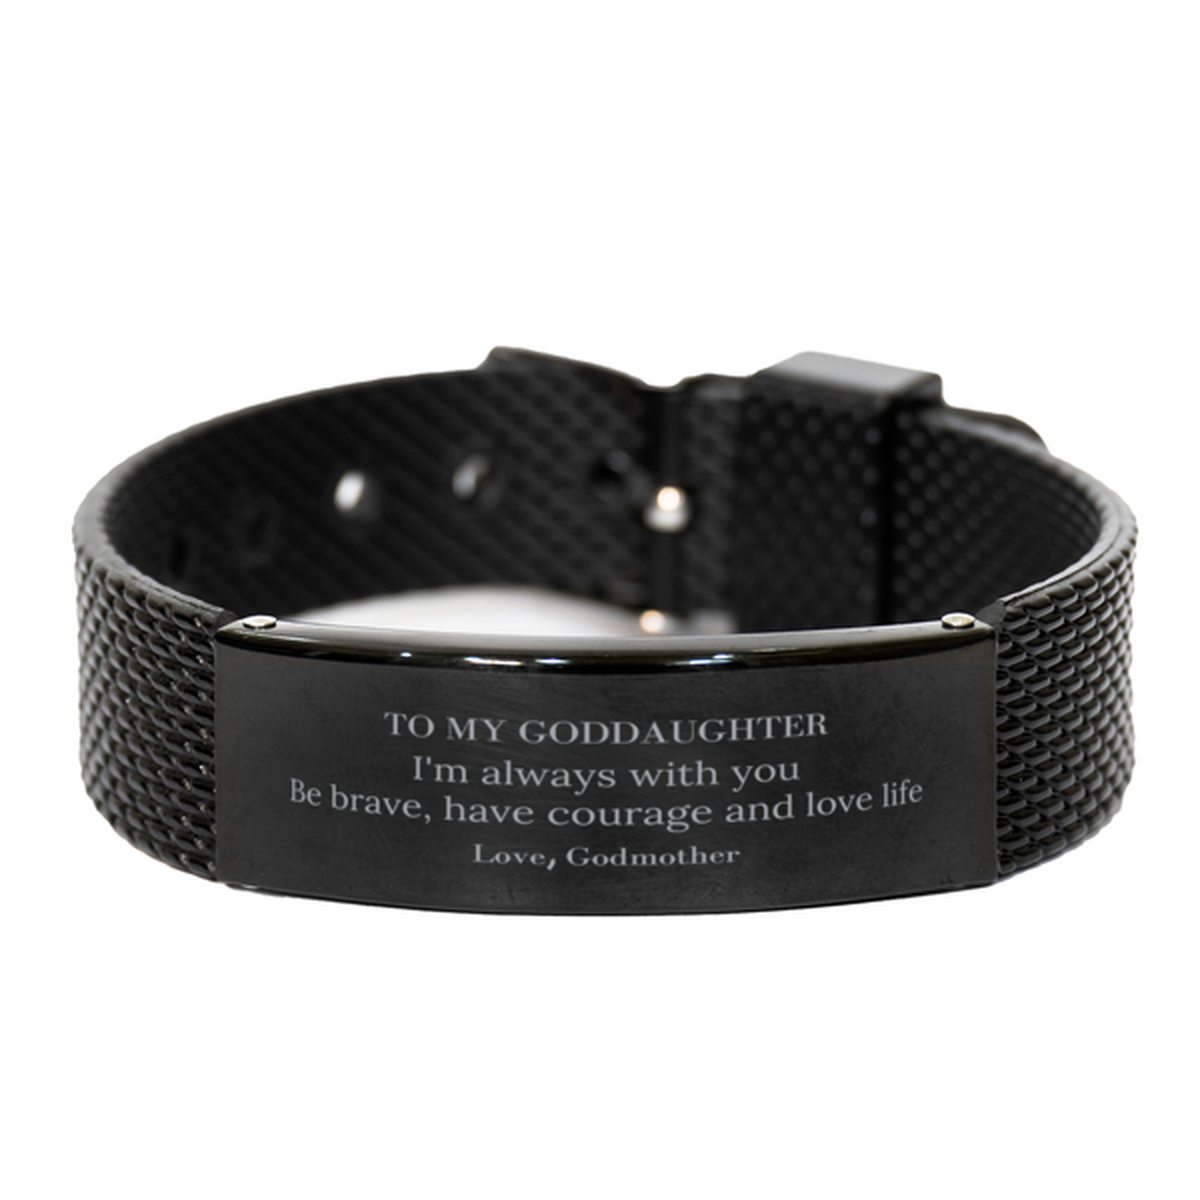 To My Goddaughter Gifts from Godmother, Unique Black Shark Mesh Bracelet Inspirational Christmas Birthday Graduation Gifts for Goddaughter I'm always with you. Be brave, have courage and love life. Love, Godmother